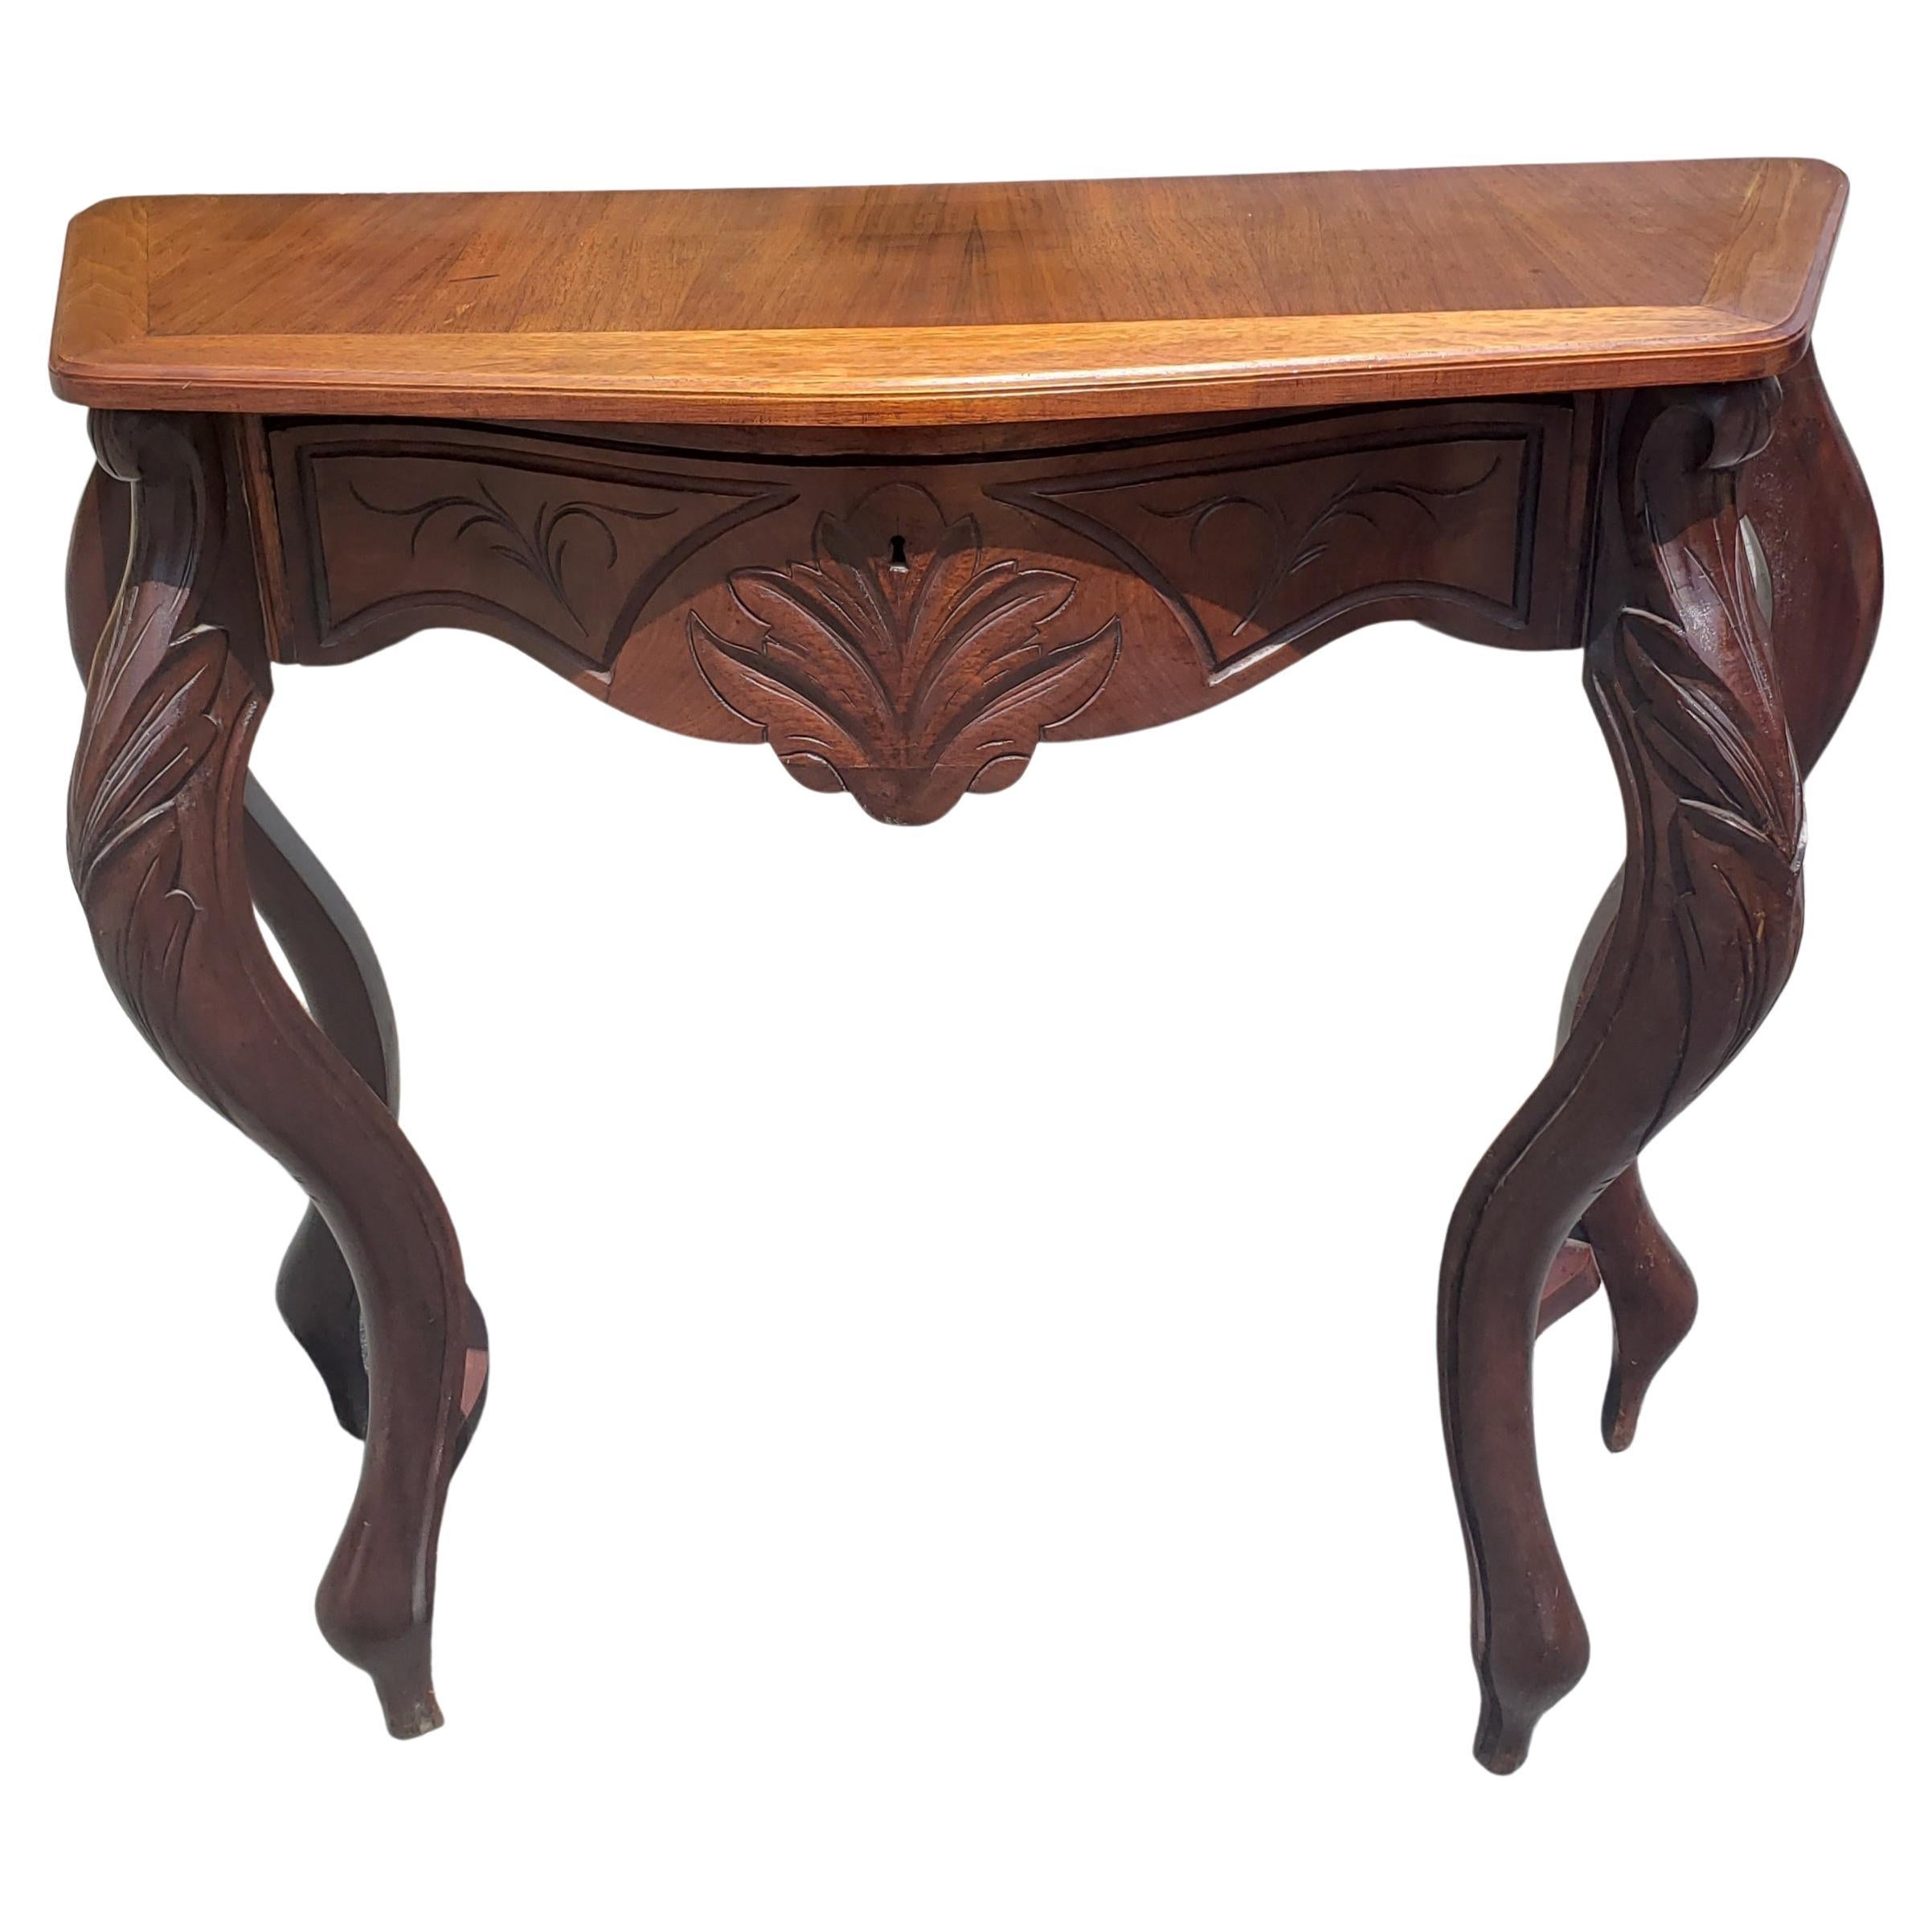 Victorian Rococo Style One Drawer Mahogany Console Table, circa 1890s For Sale